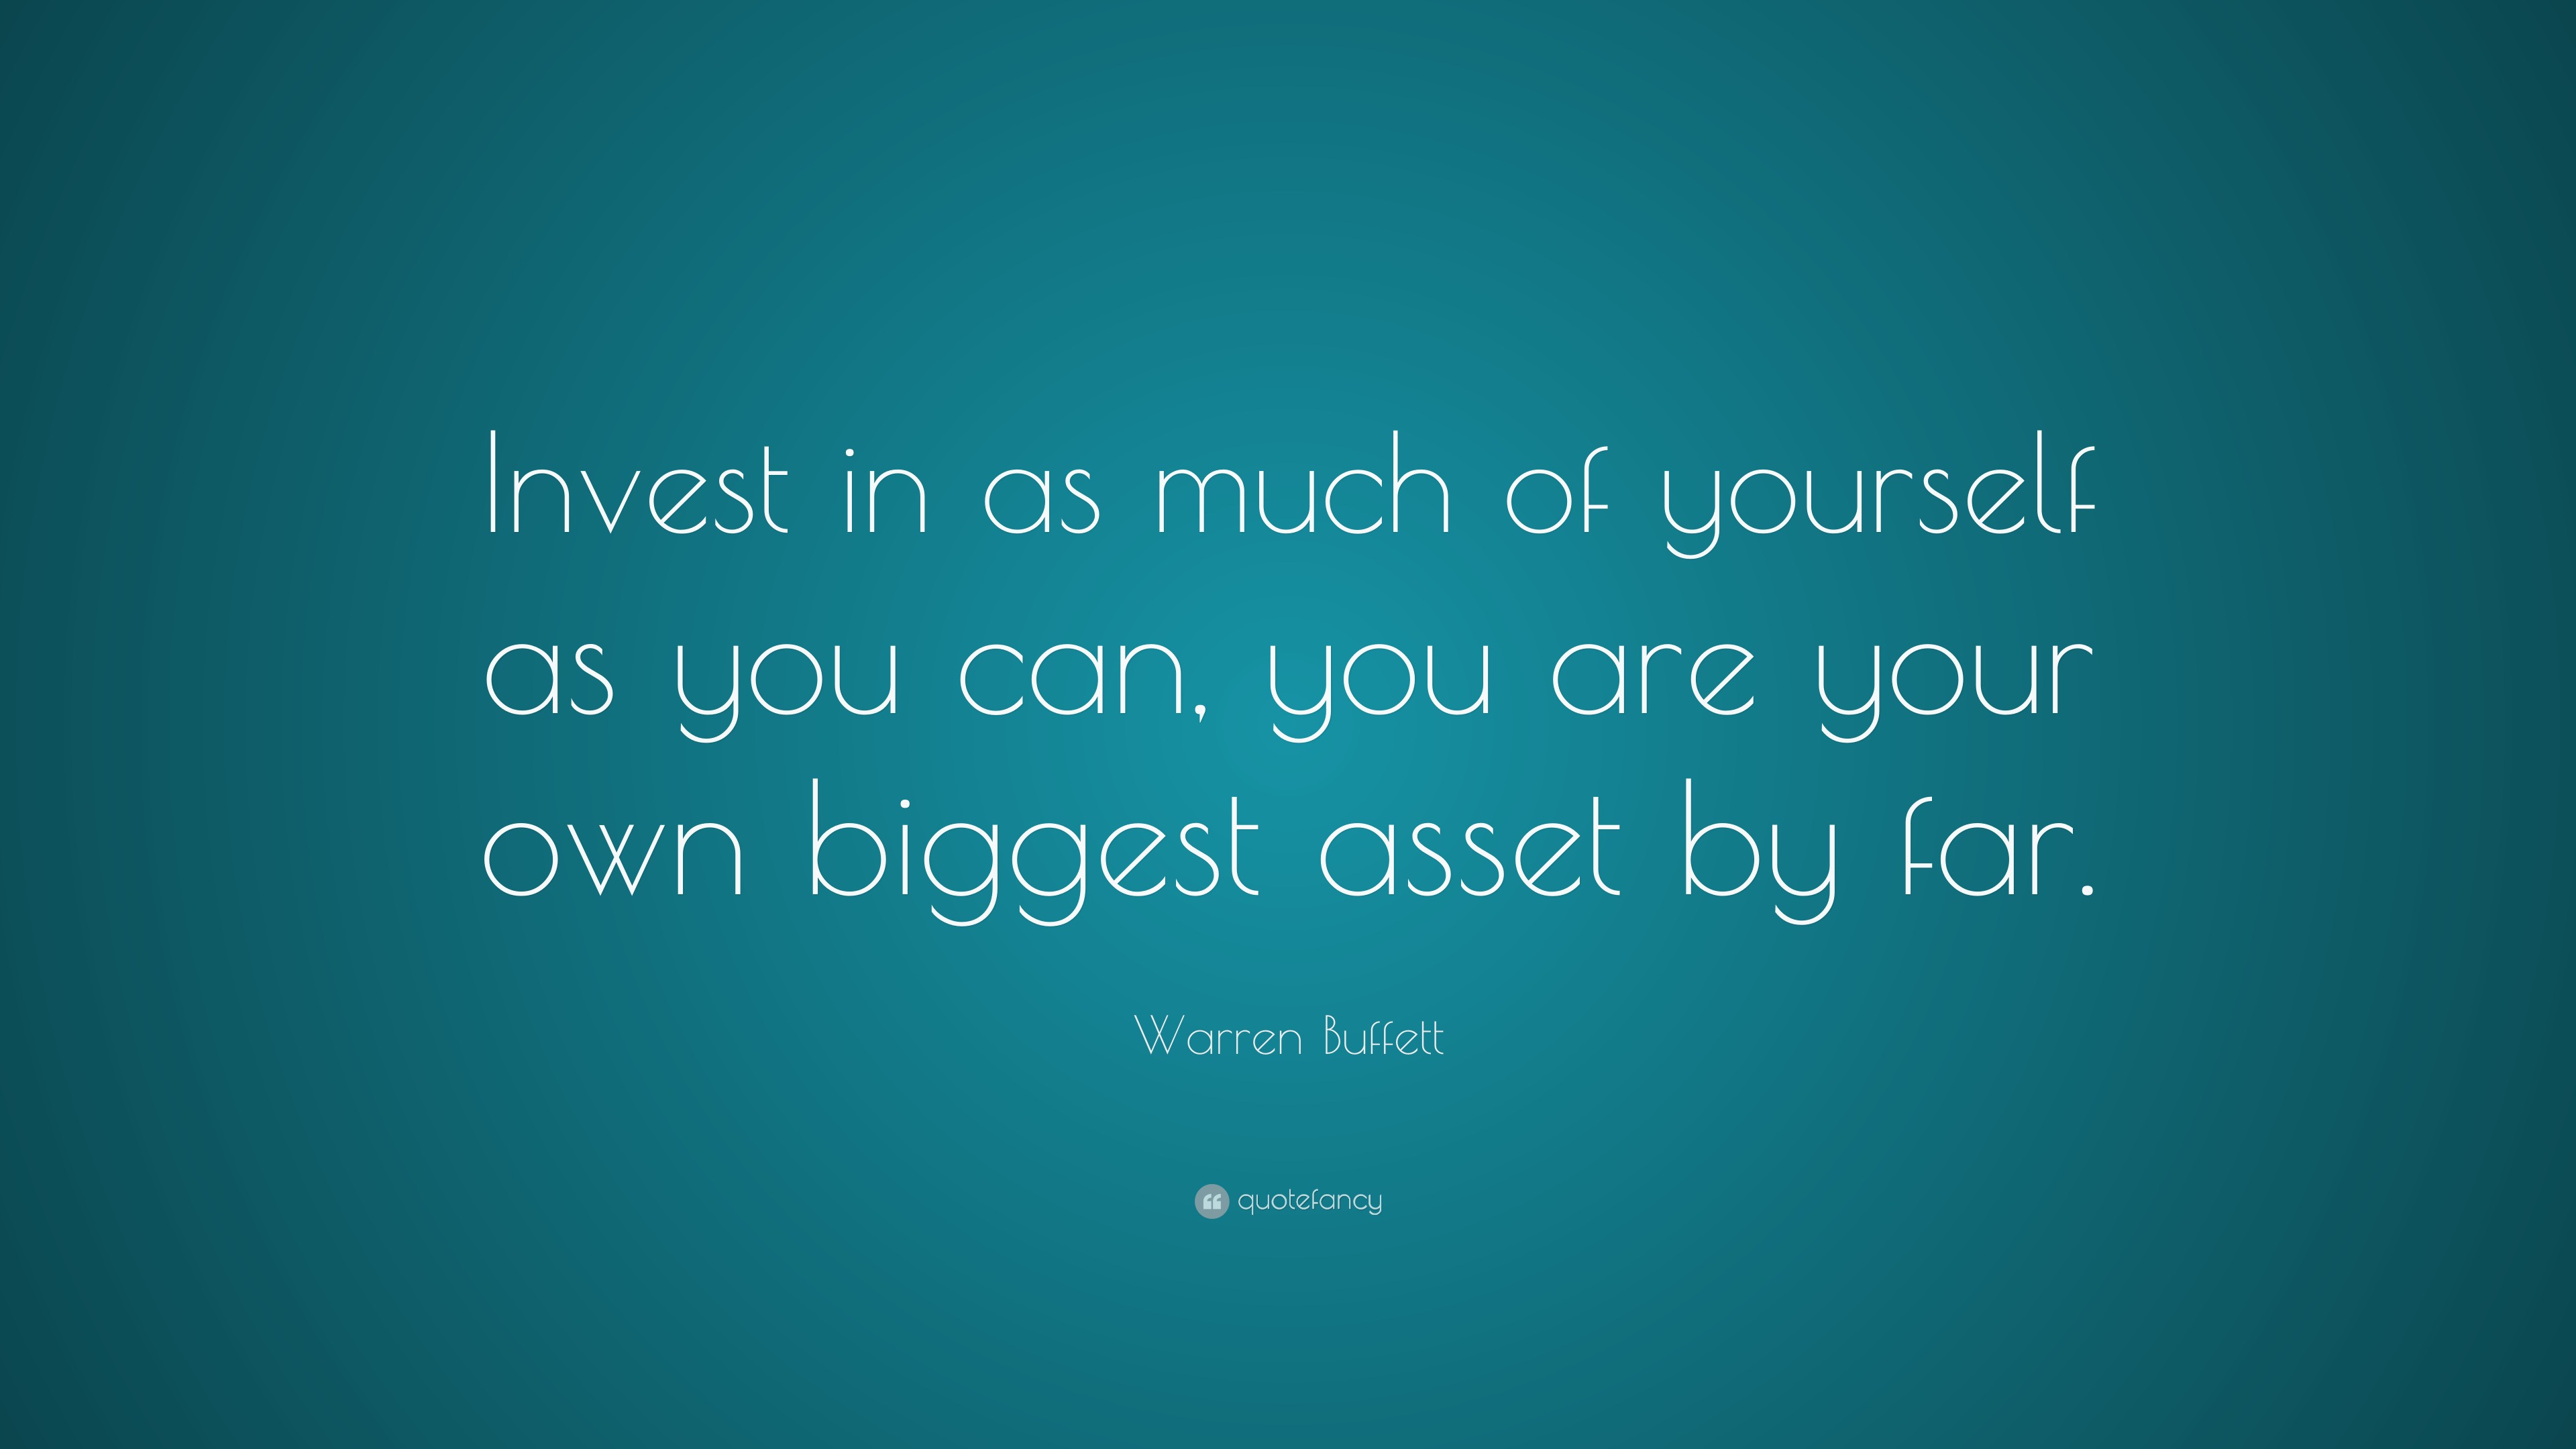 2037591 Warren Buffett Quote Invest in as much of yourself as you can you